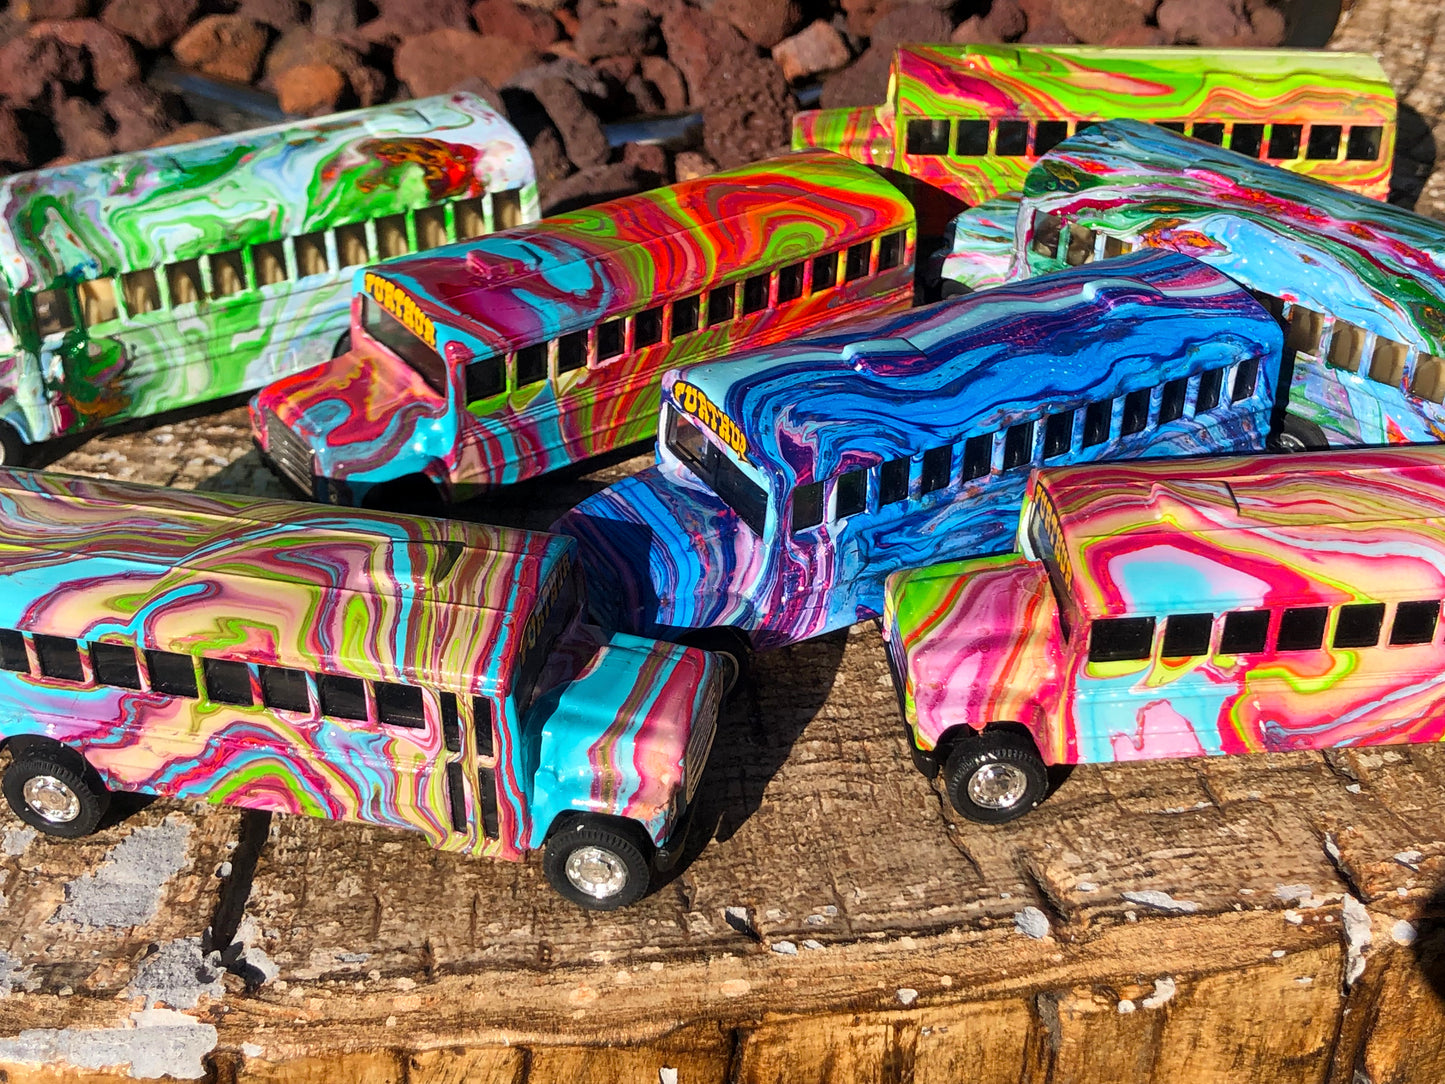 A Little Furthur - Smaller Hand Painted Dye Cast Toy Bus